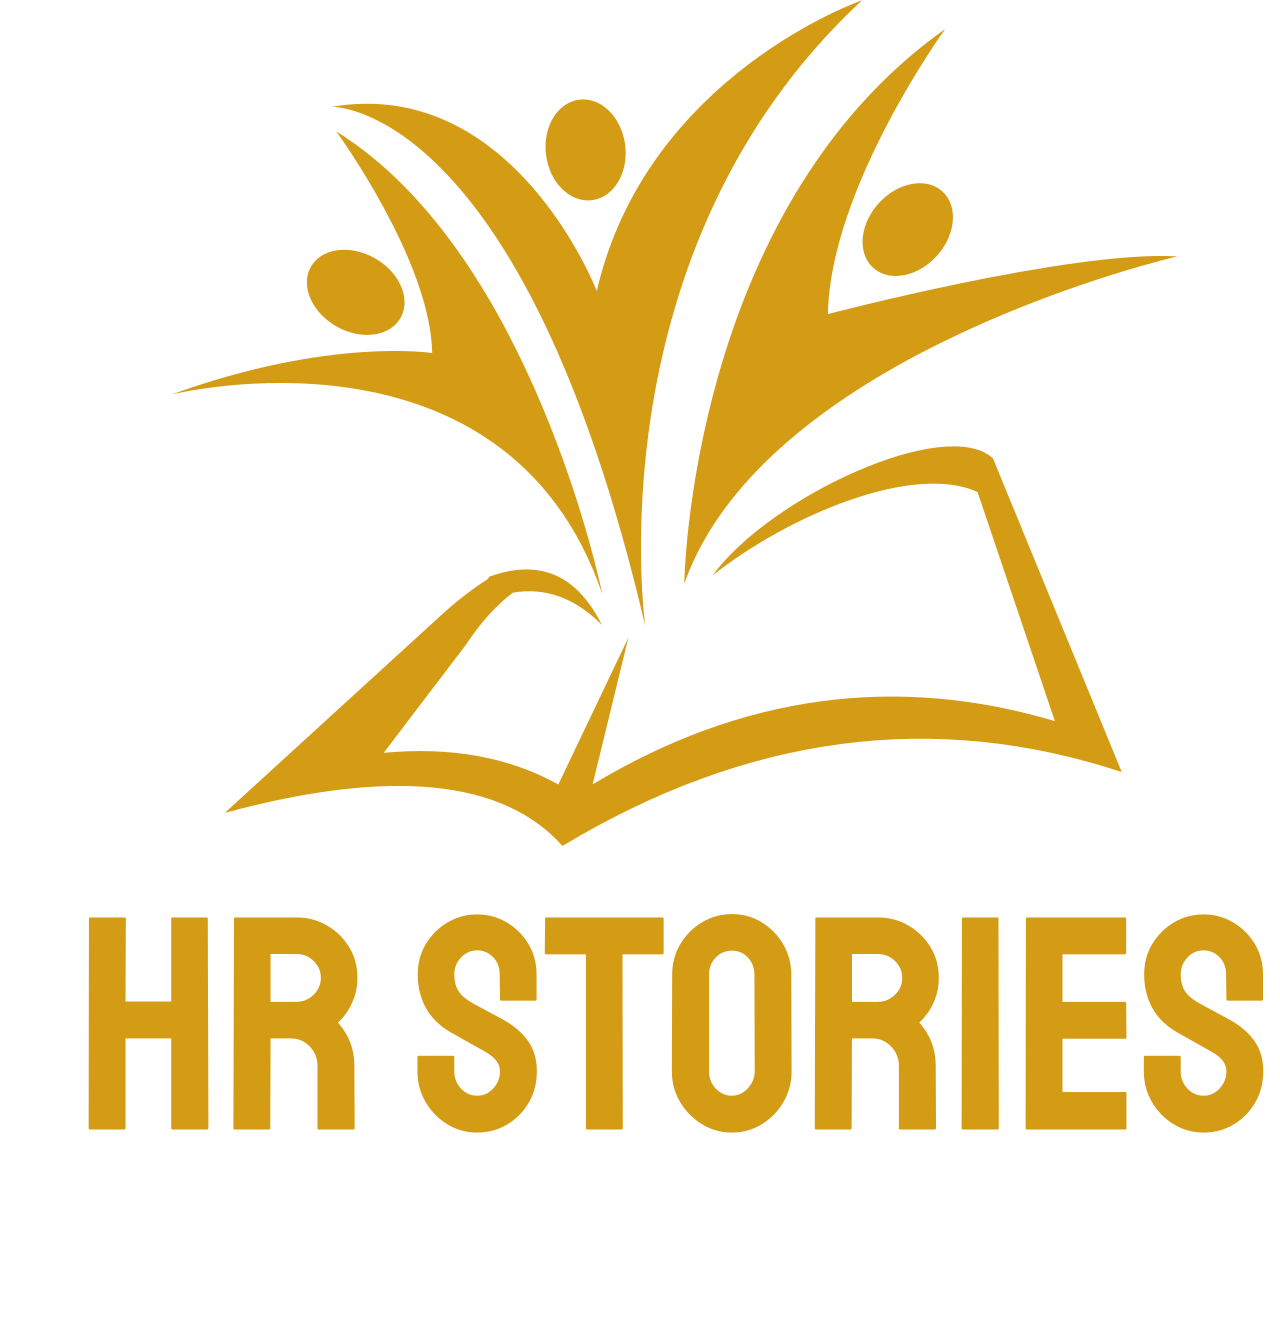 HR Stories - HR Consulting, Training, Podcast